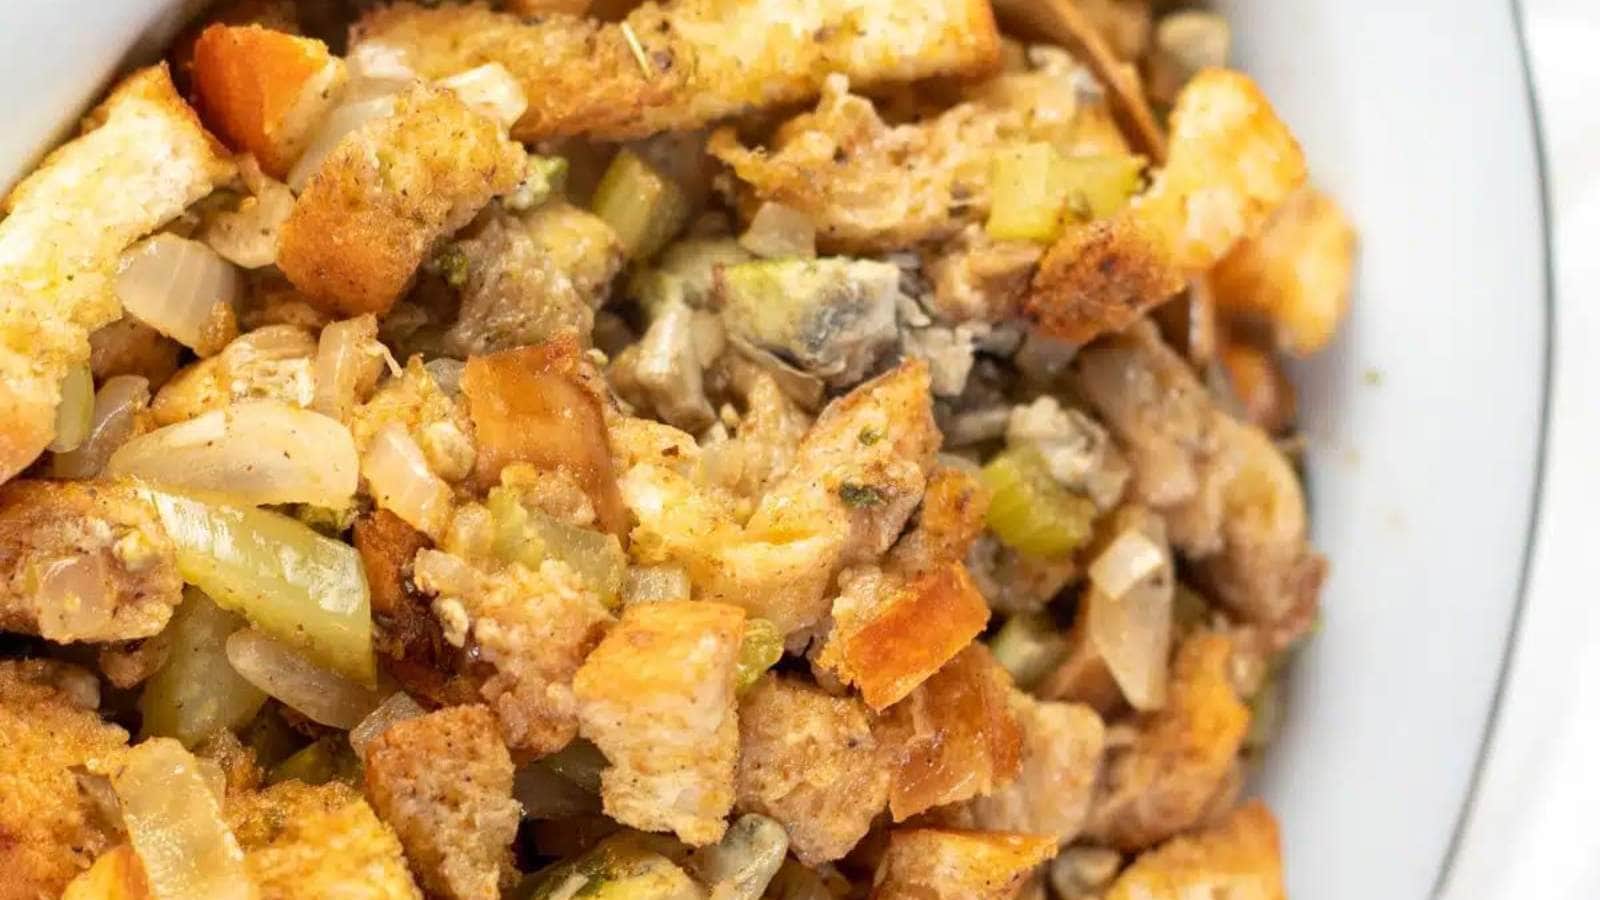 Oyster Dressing recipe by Bake it with love.